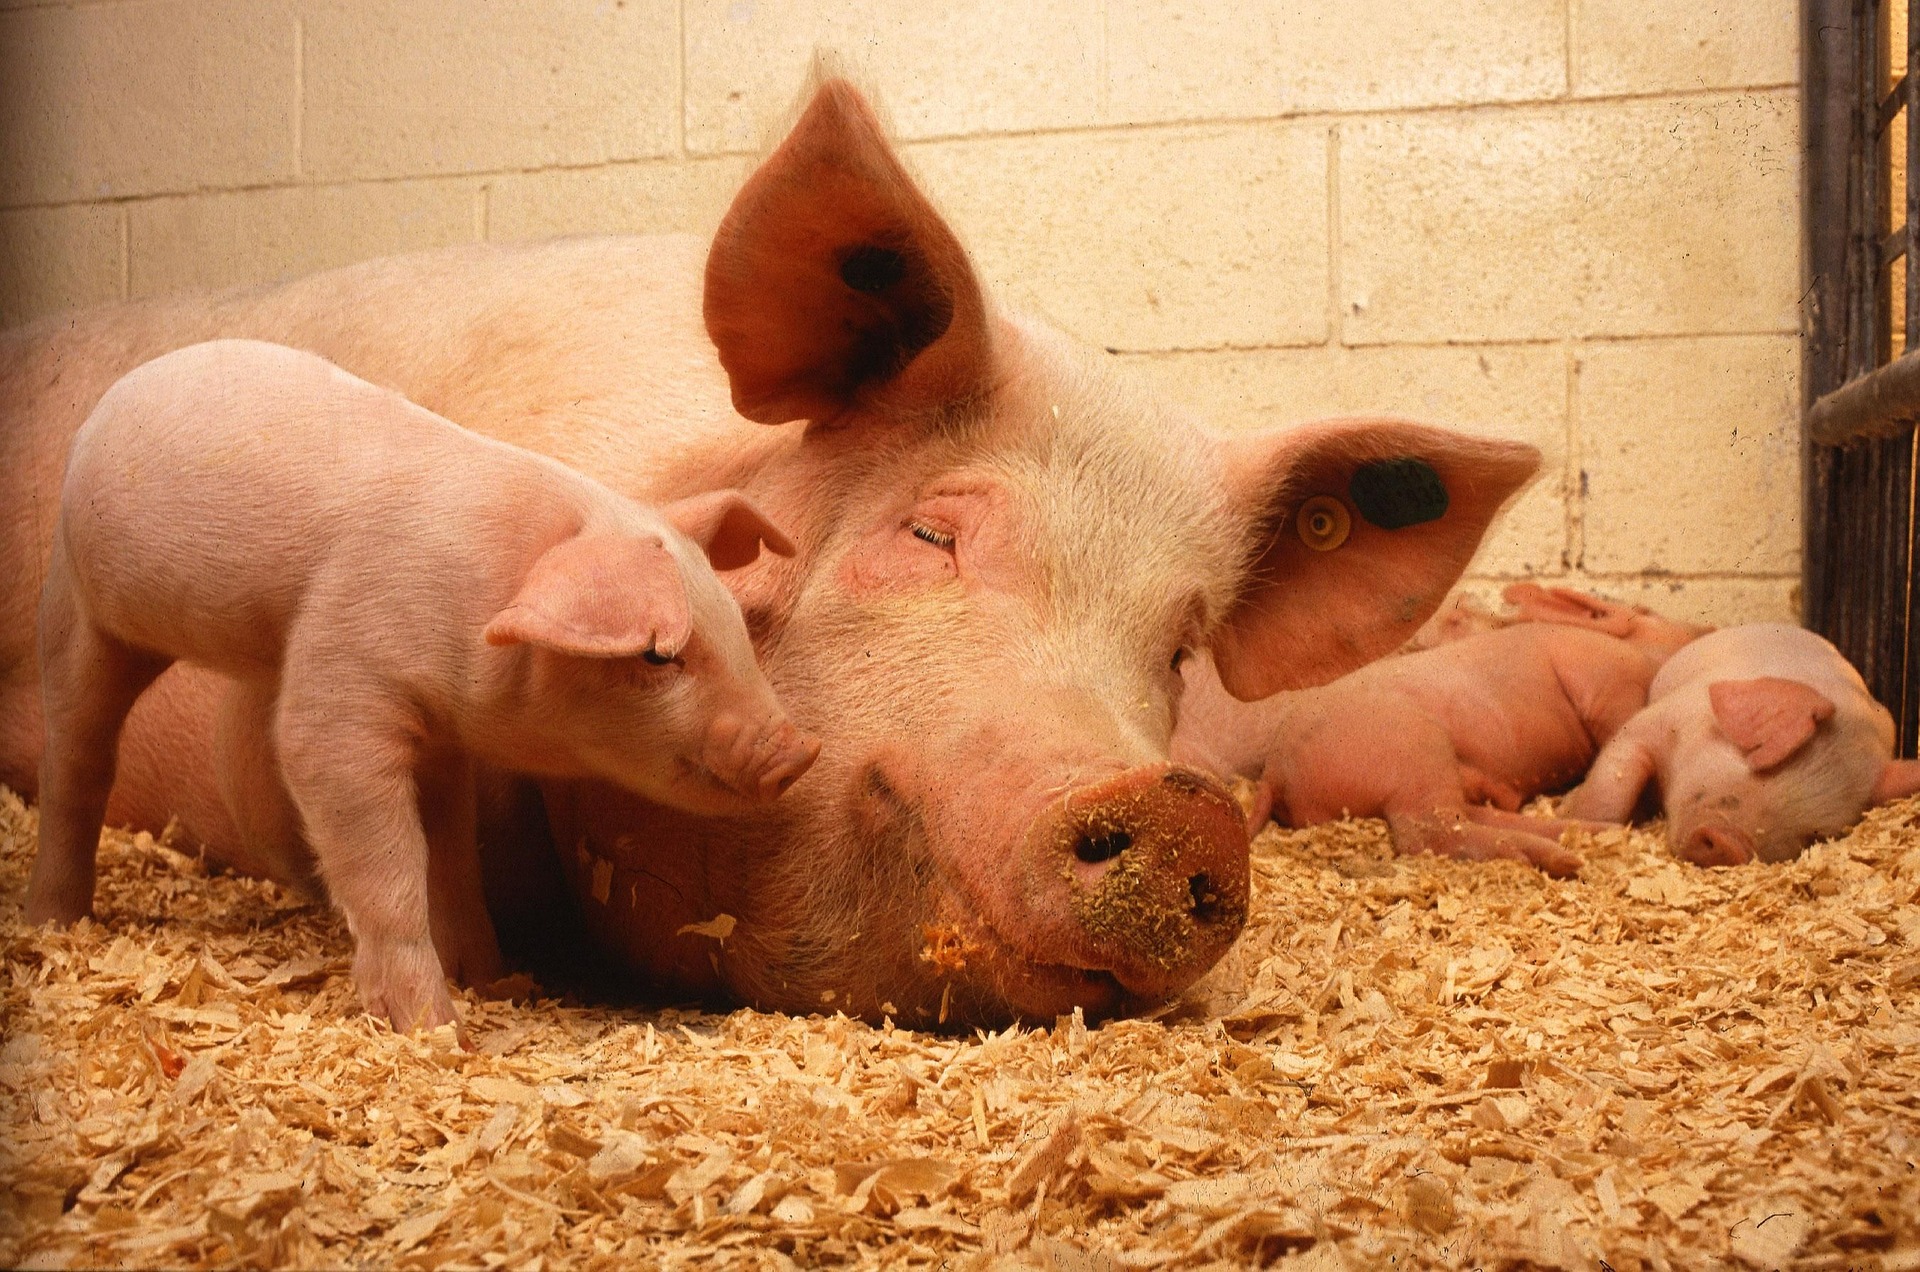 A sow lies with multiple piglets